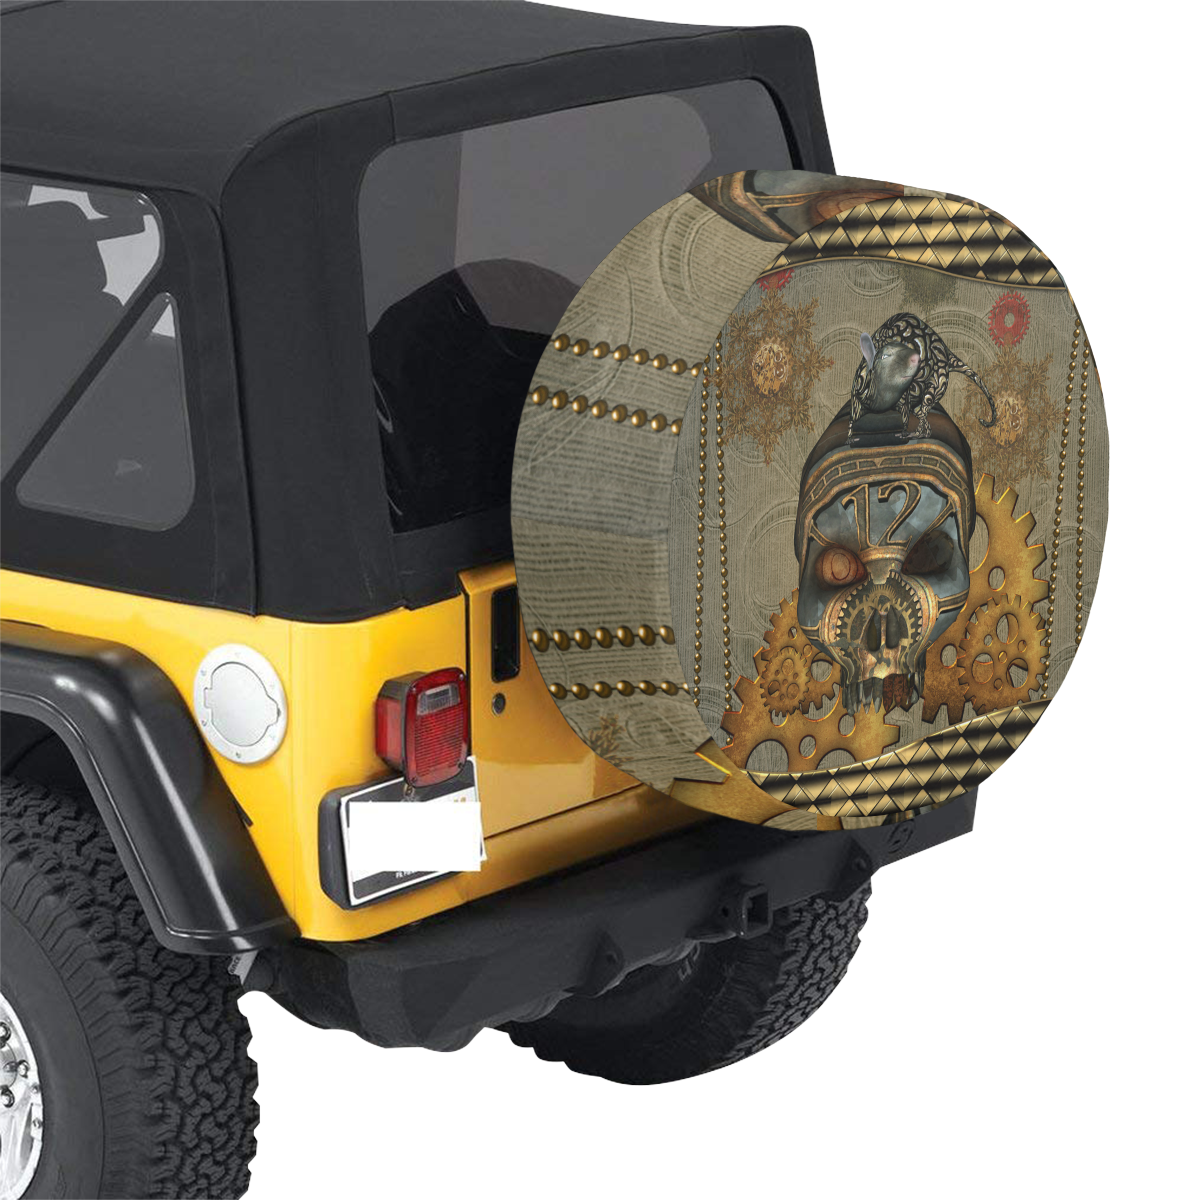 Awesome steampunk skull 34 Inch Spare Tire Cover